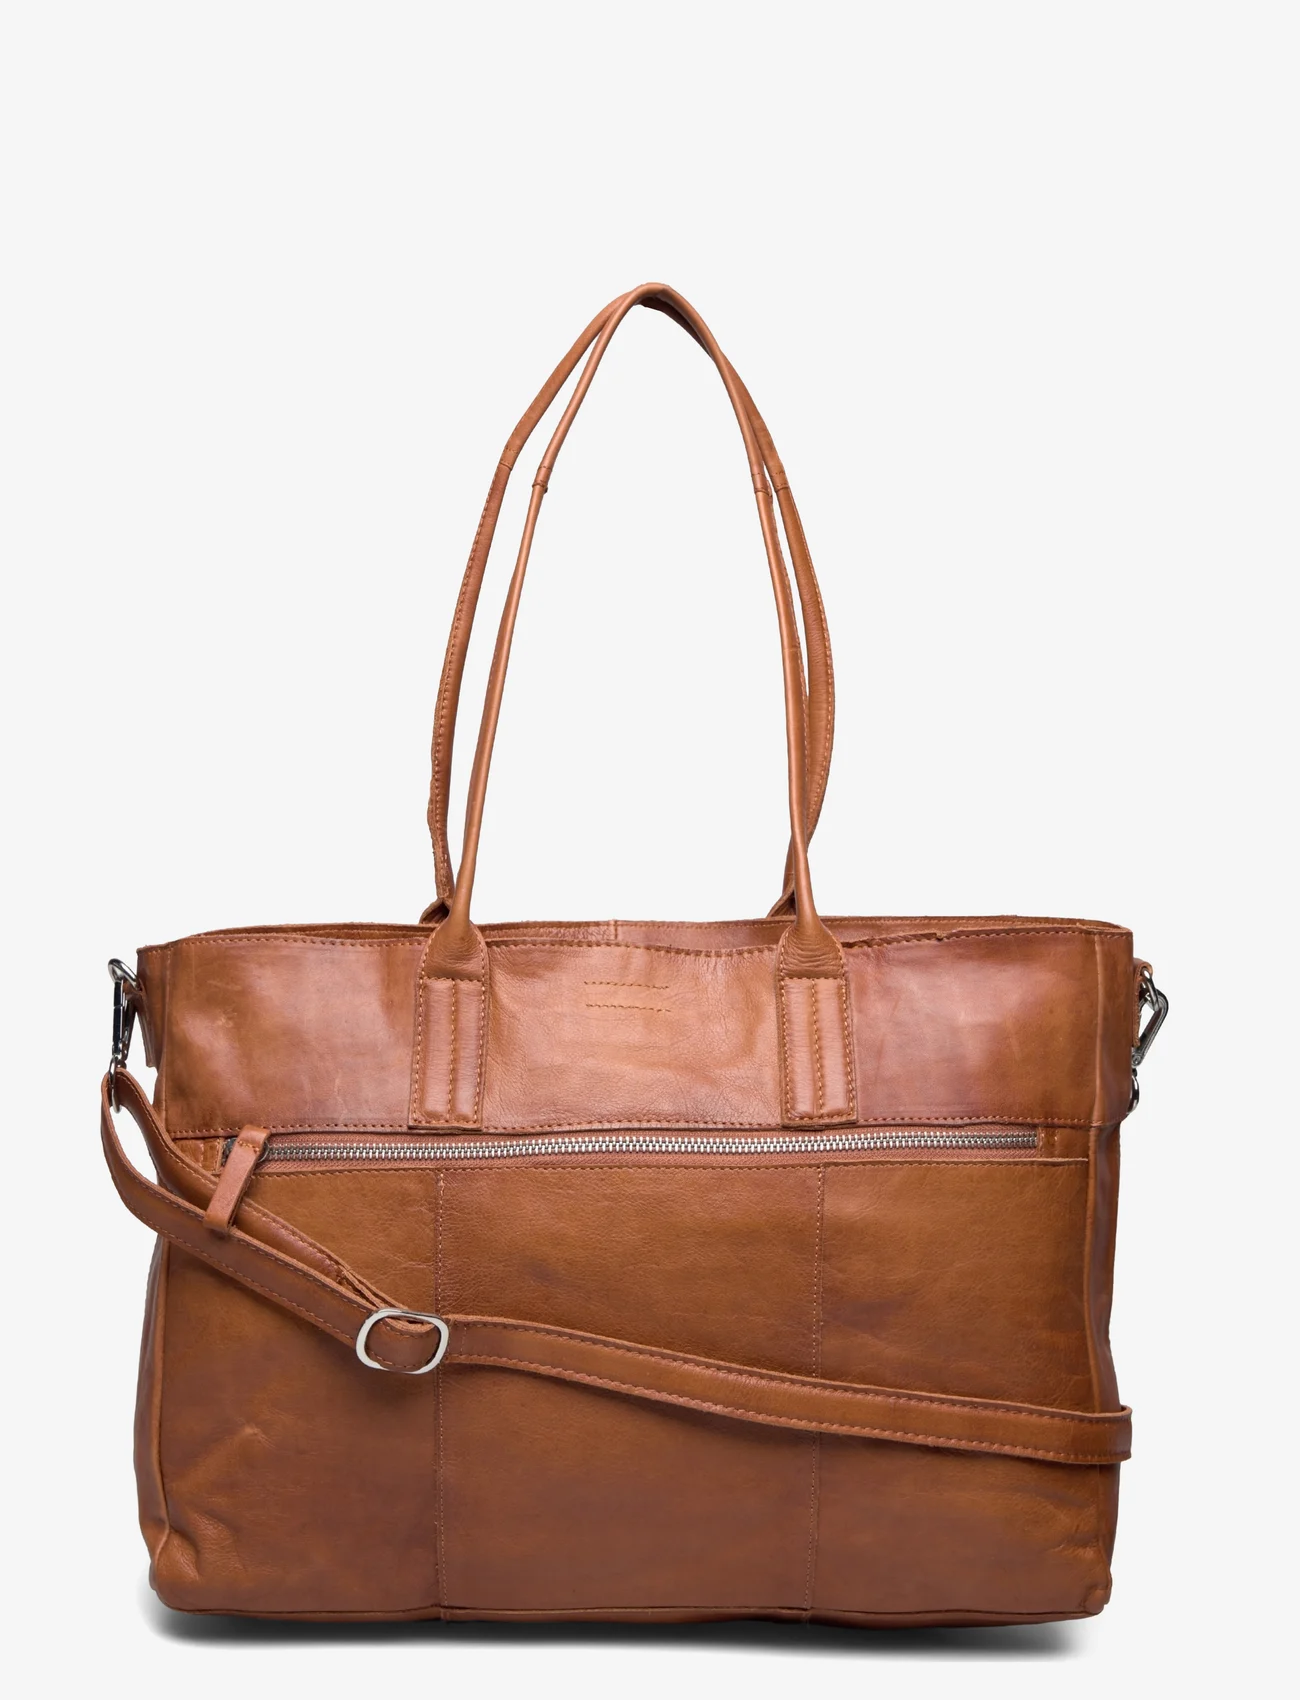 Still Nordic - Basic Work Bag - party wear at outlet prices - caramel - 0